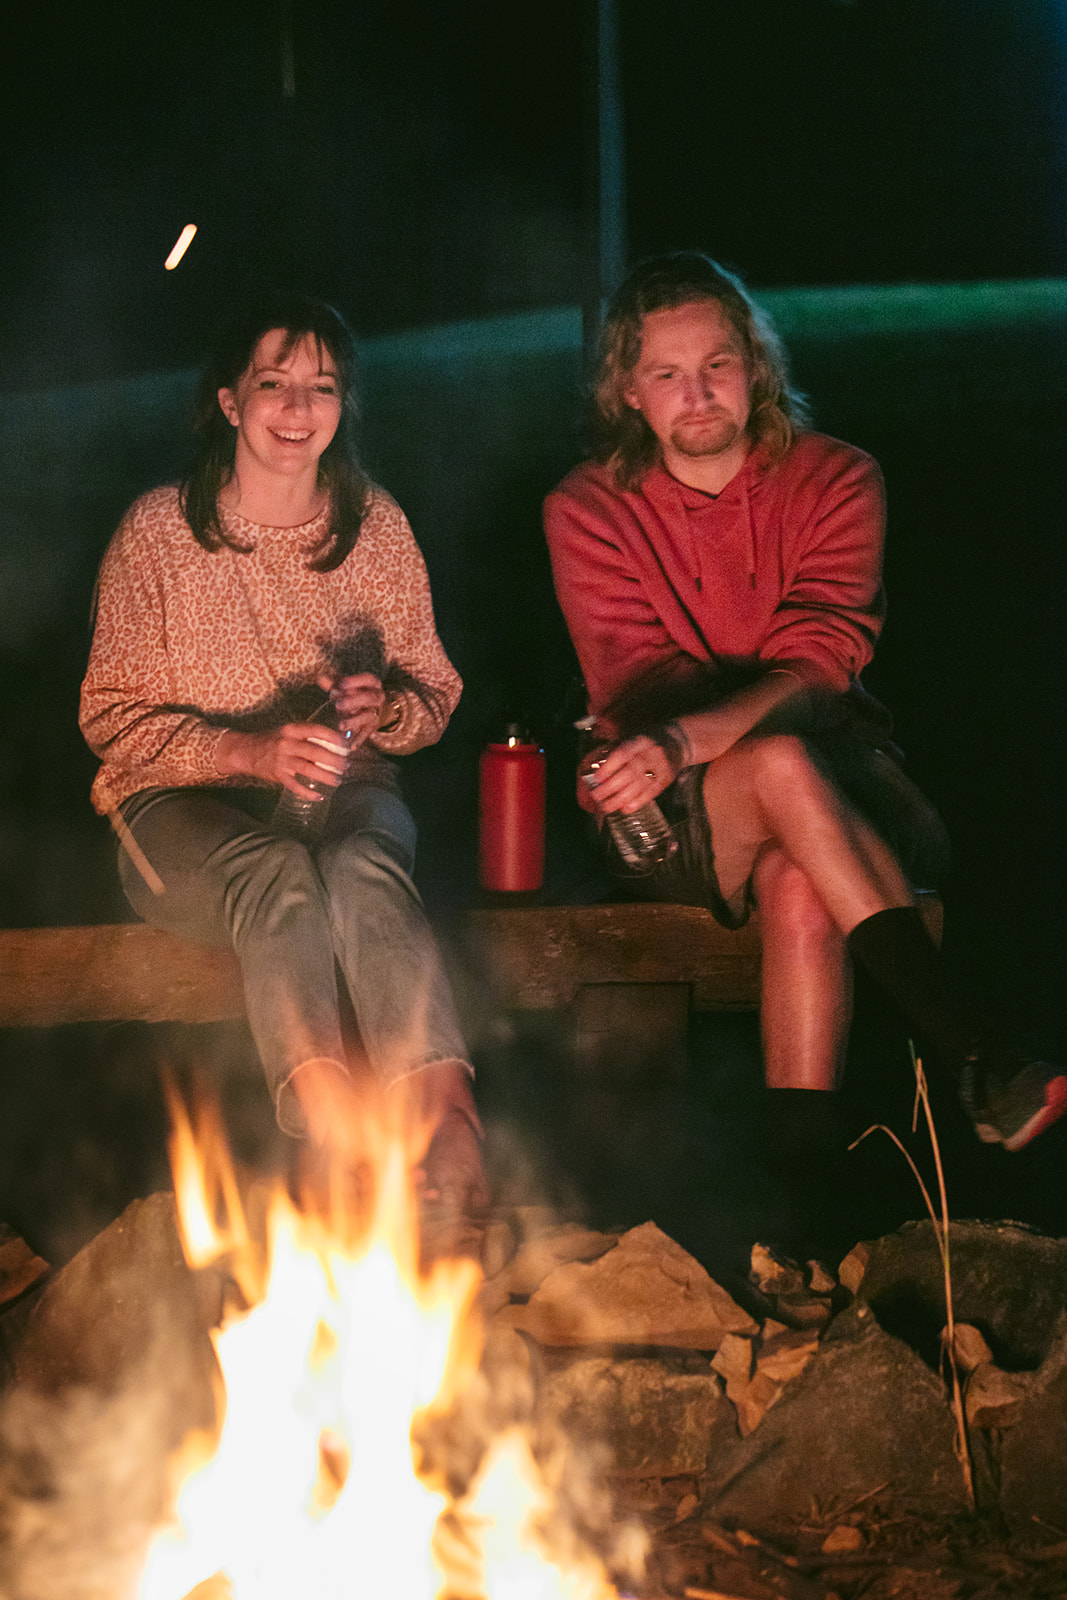 The couple enjoy a relaxing moment by the fire pit after all is said and done.